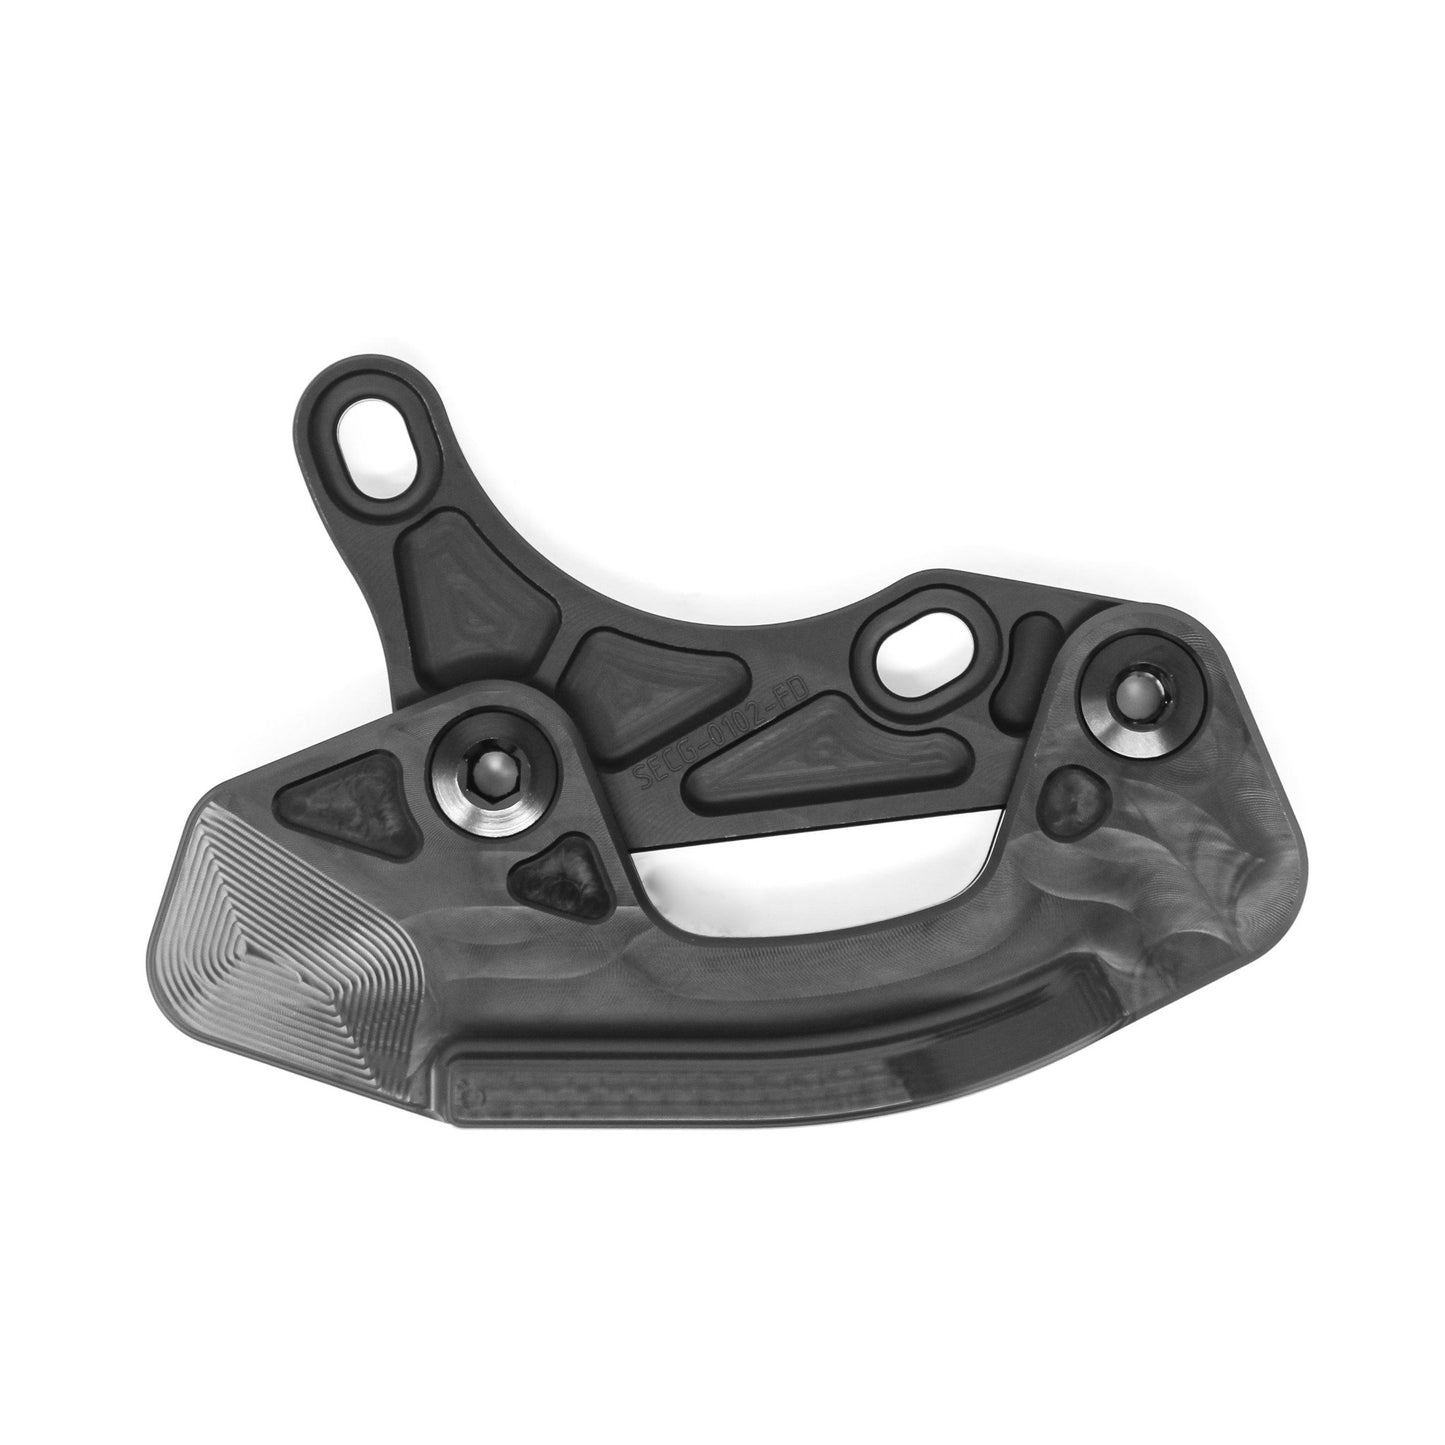 Forbidden Lower Chain Guide Black 32 Tooth Product